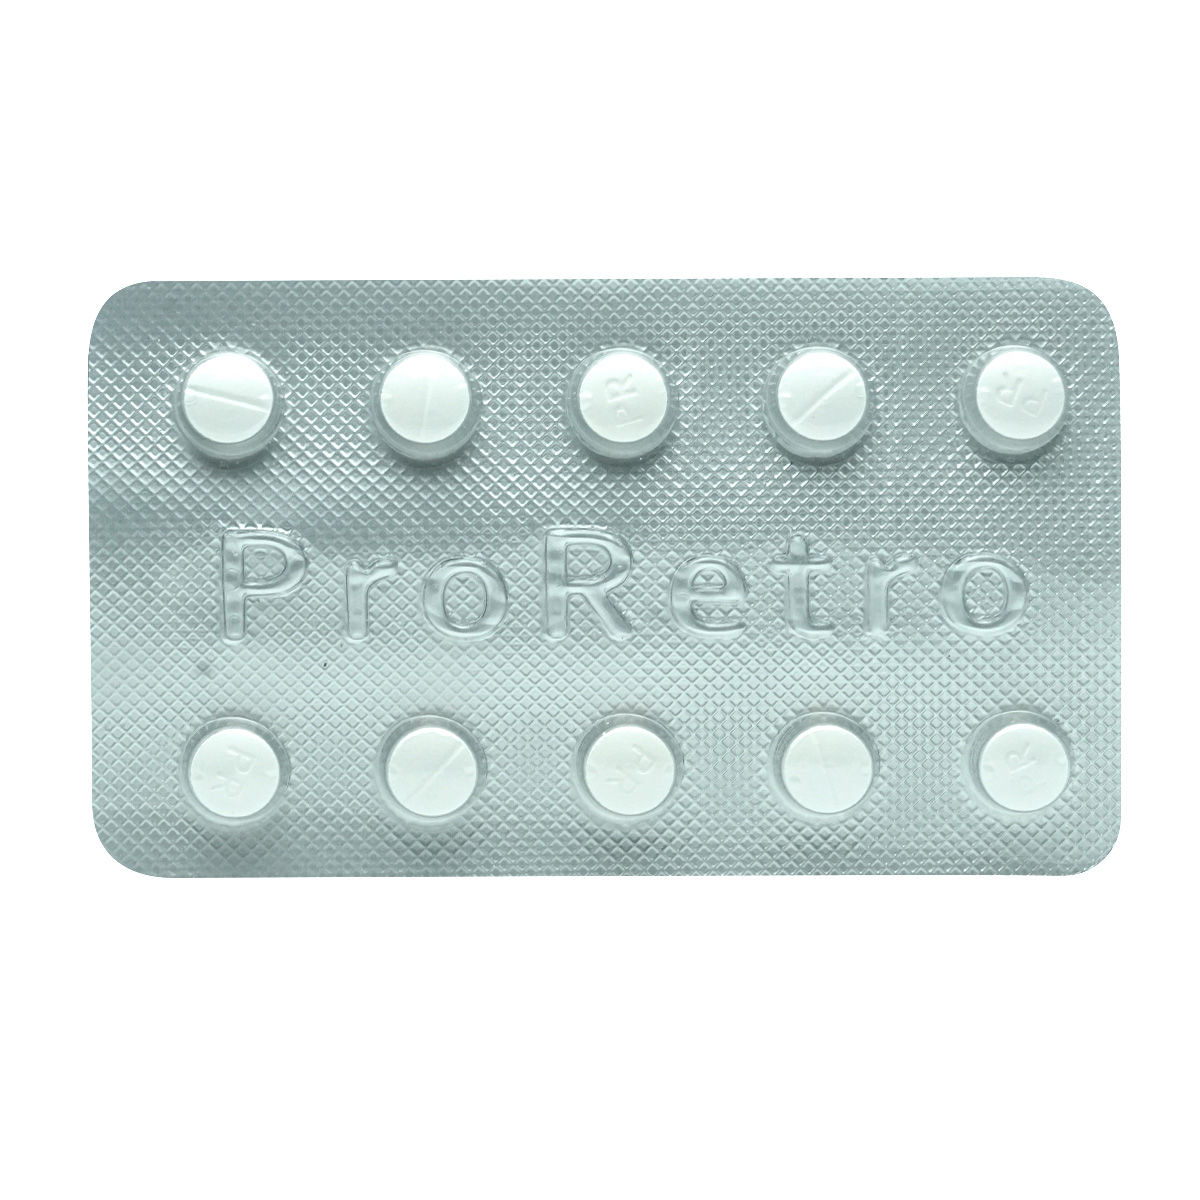 Proretro Tablet 10's, Pack of 10 TABLETS